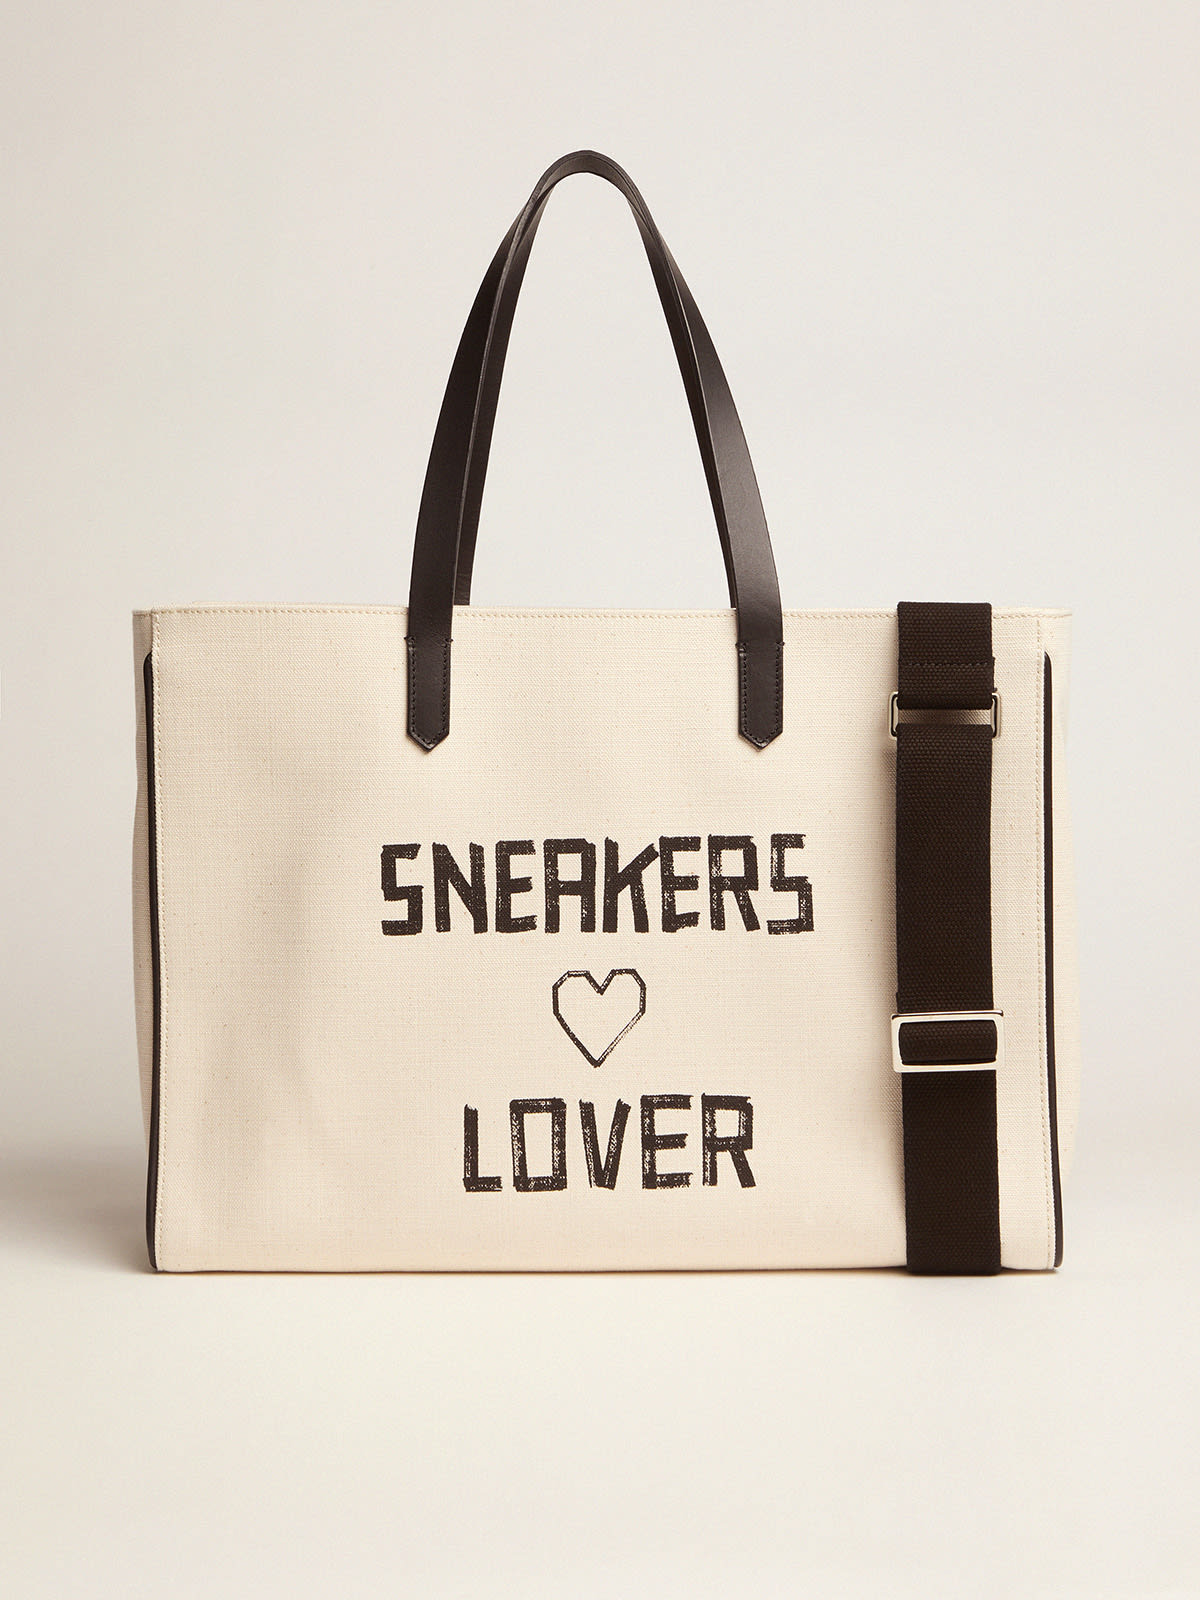 Golden Goose - SNEAKERS LOVERS E-W 캘리포니아백 in 